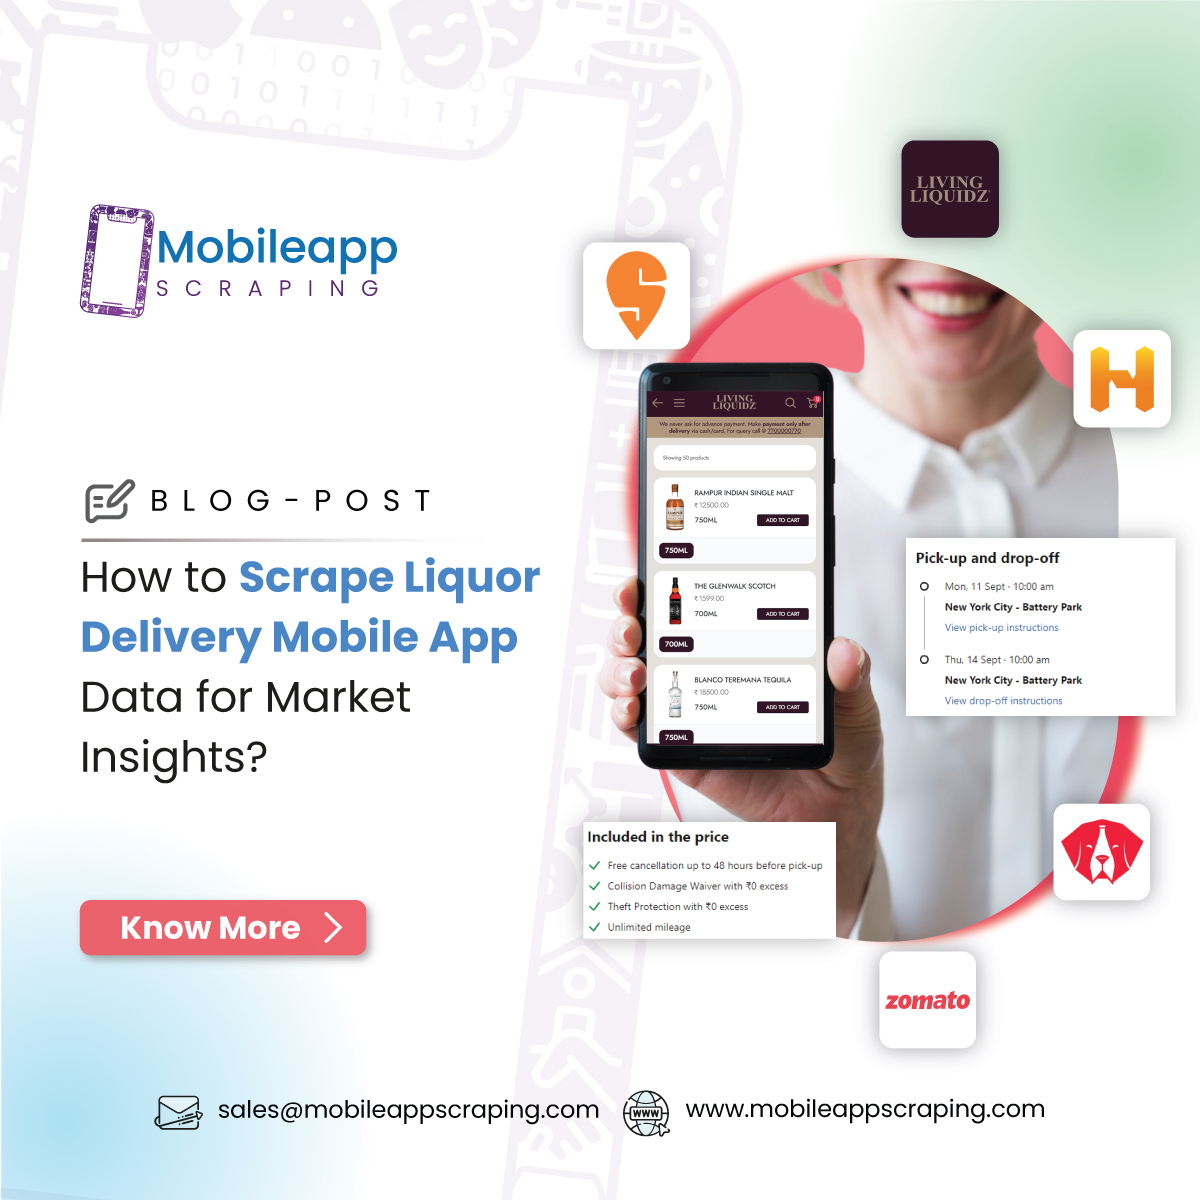 #MobileAppScraping offers #LiquorDeliveryMobileAppDataScraping Services to extract data from popular Liquor Delivery Mobile Apps such as #Swiggy, #Hipbar, #Zomato, #BottleRover, #Jhoom, #BevQ, #LivingLiquidz, etc.

mobileappscraping.com/scrape-liquor-…

#ScrapeAlcoholData #uk #uae #usa